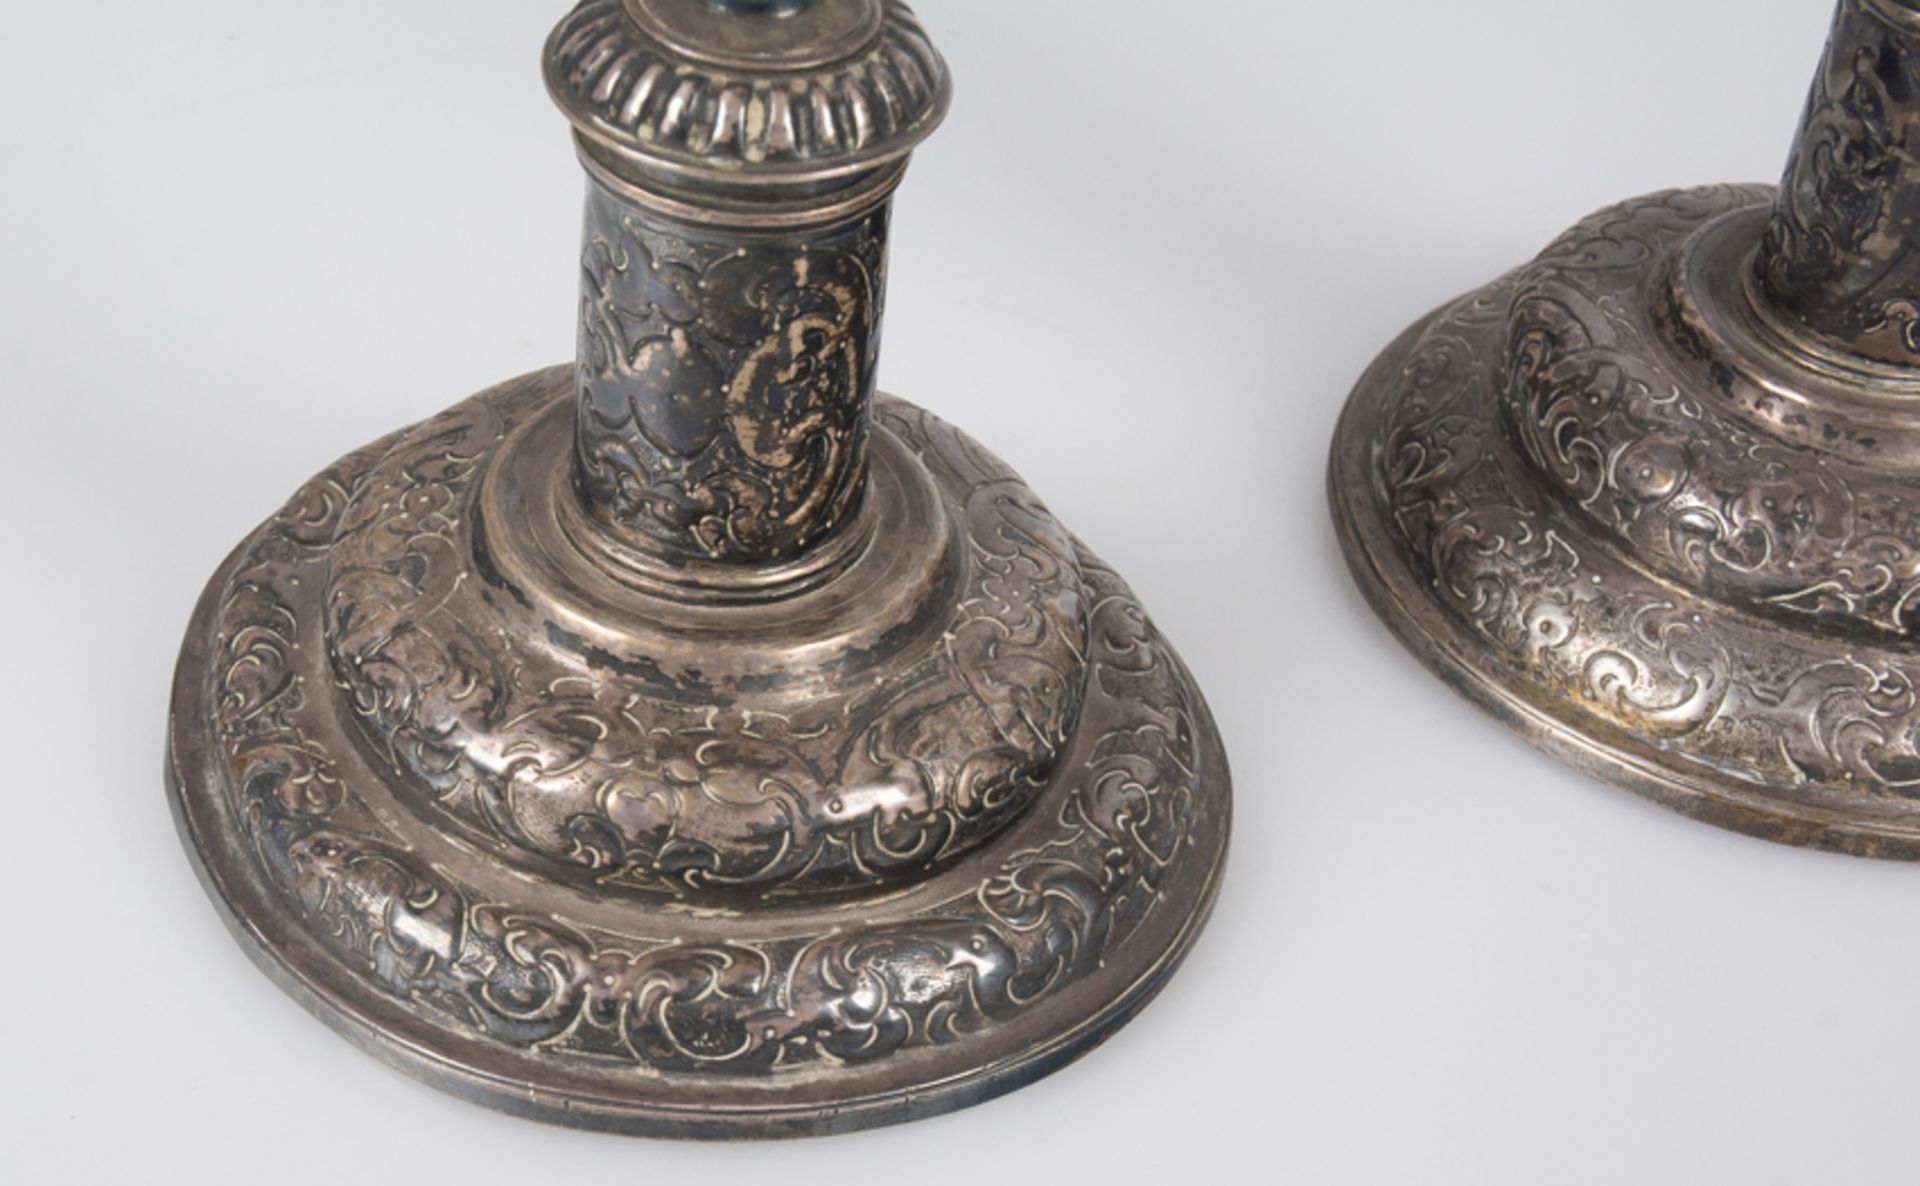 Pair of embossed and chased Spanish silver candlesticks. 16th 17th century. - Image 5 of 8